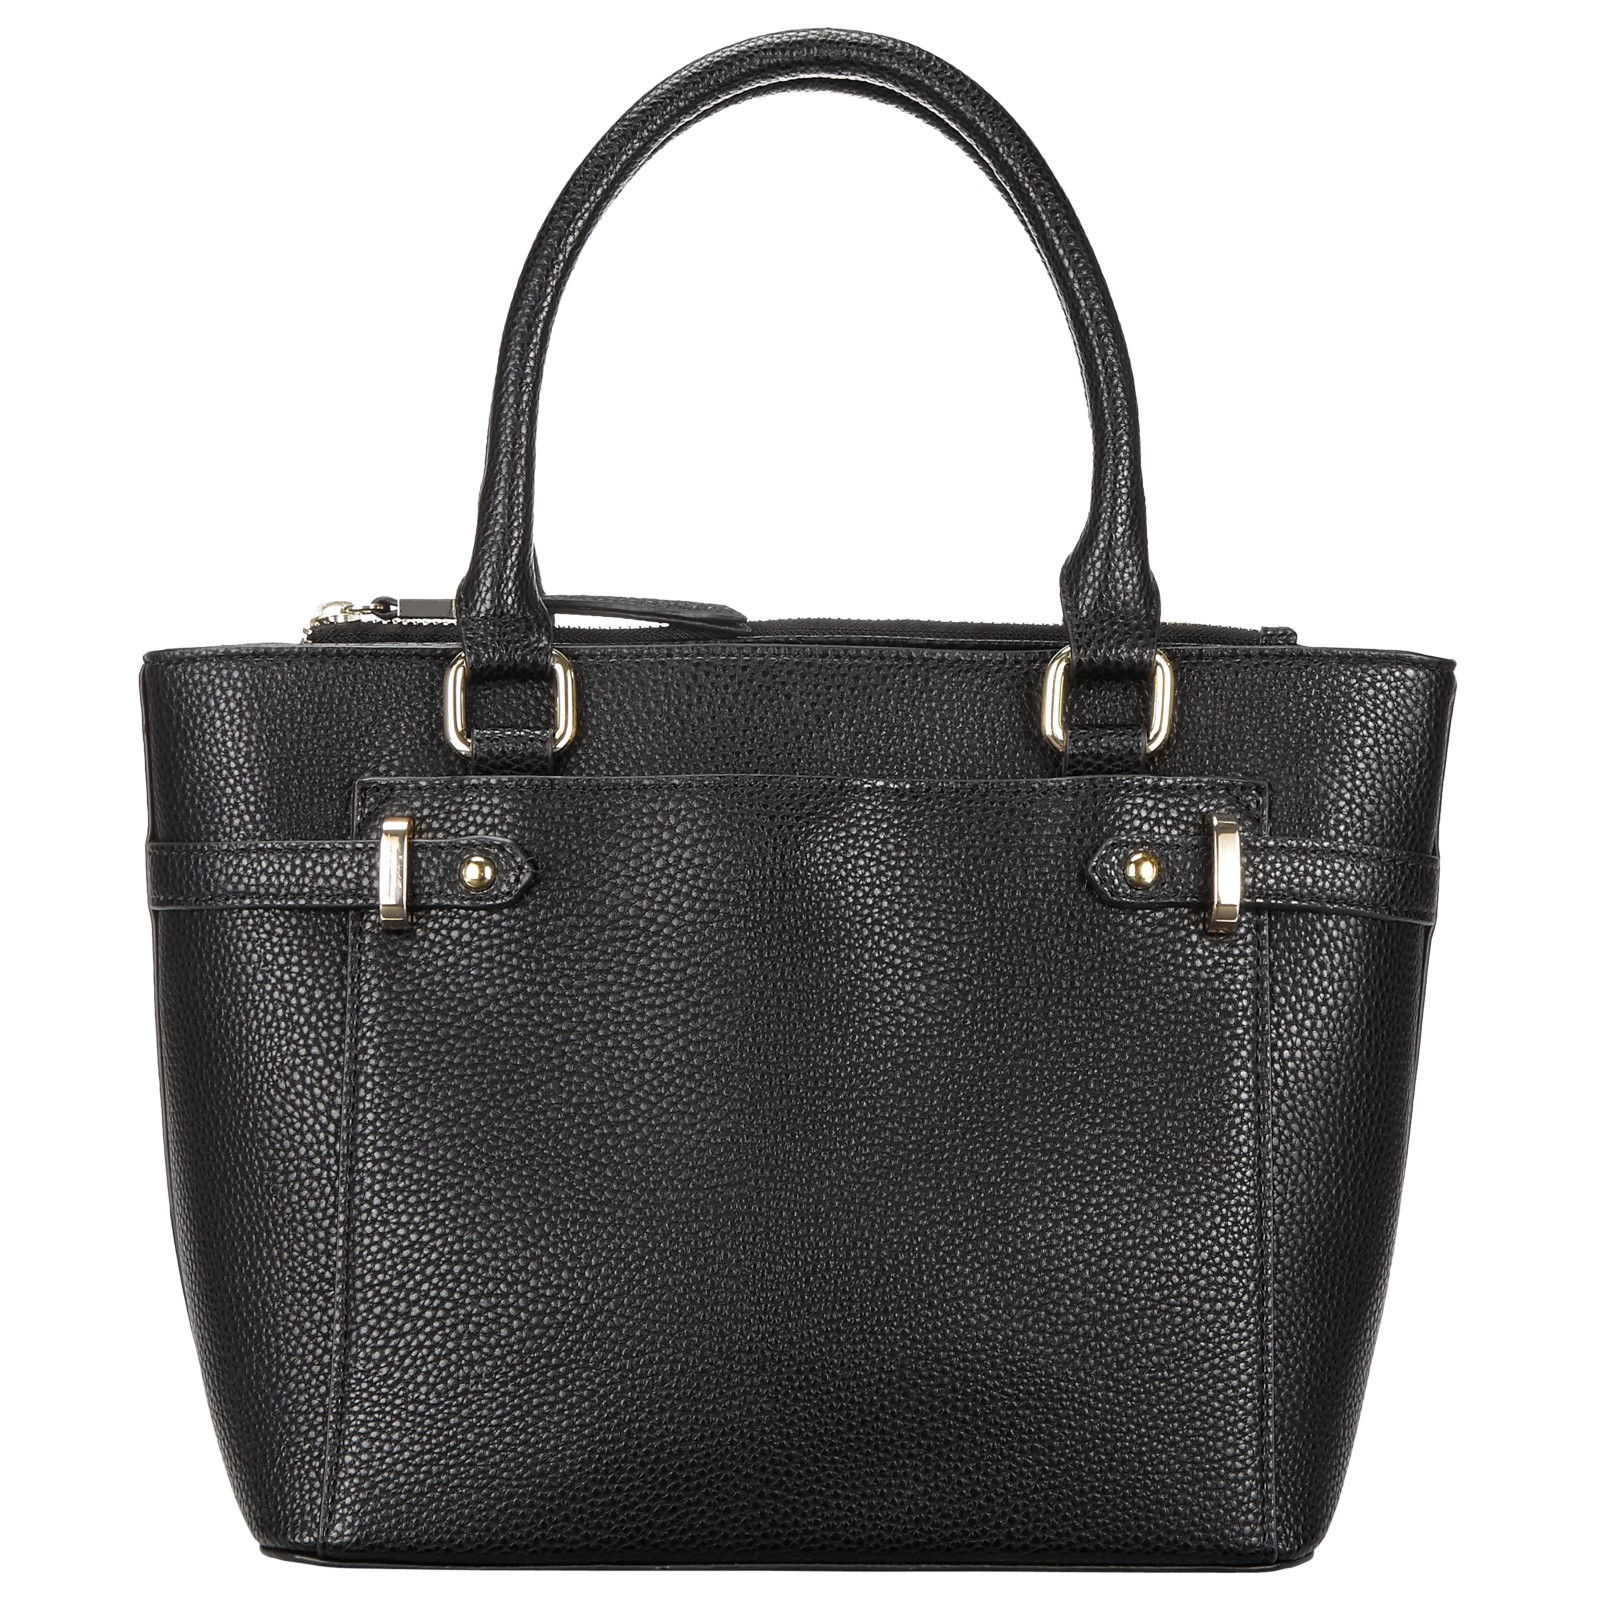 John Lewis Leather Pippa Small Grab Bag in Black - Lyst